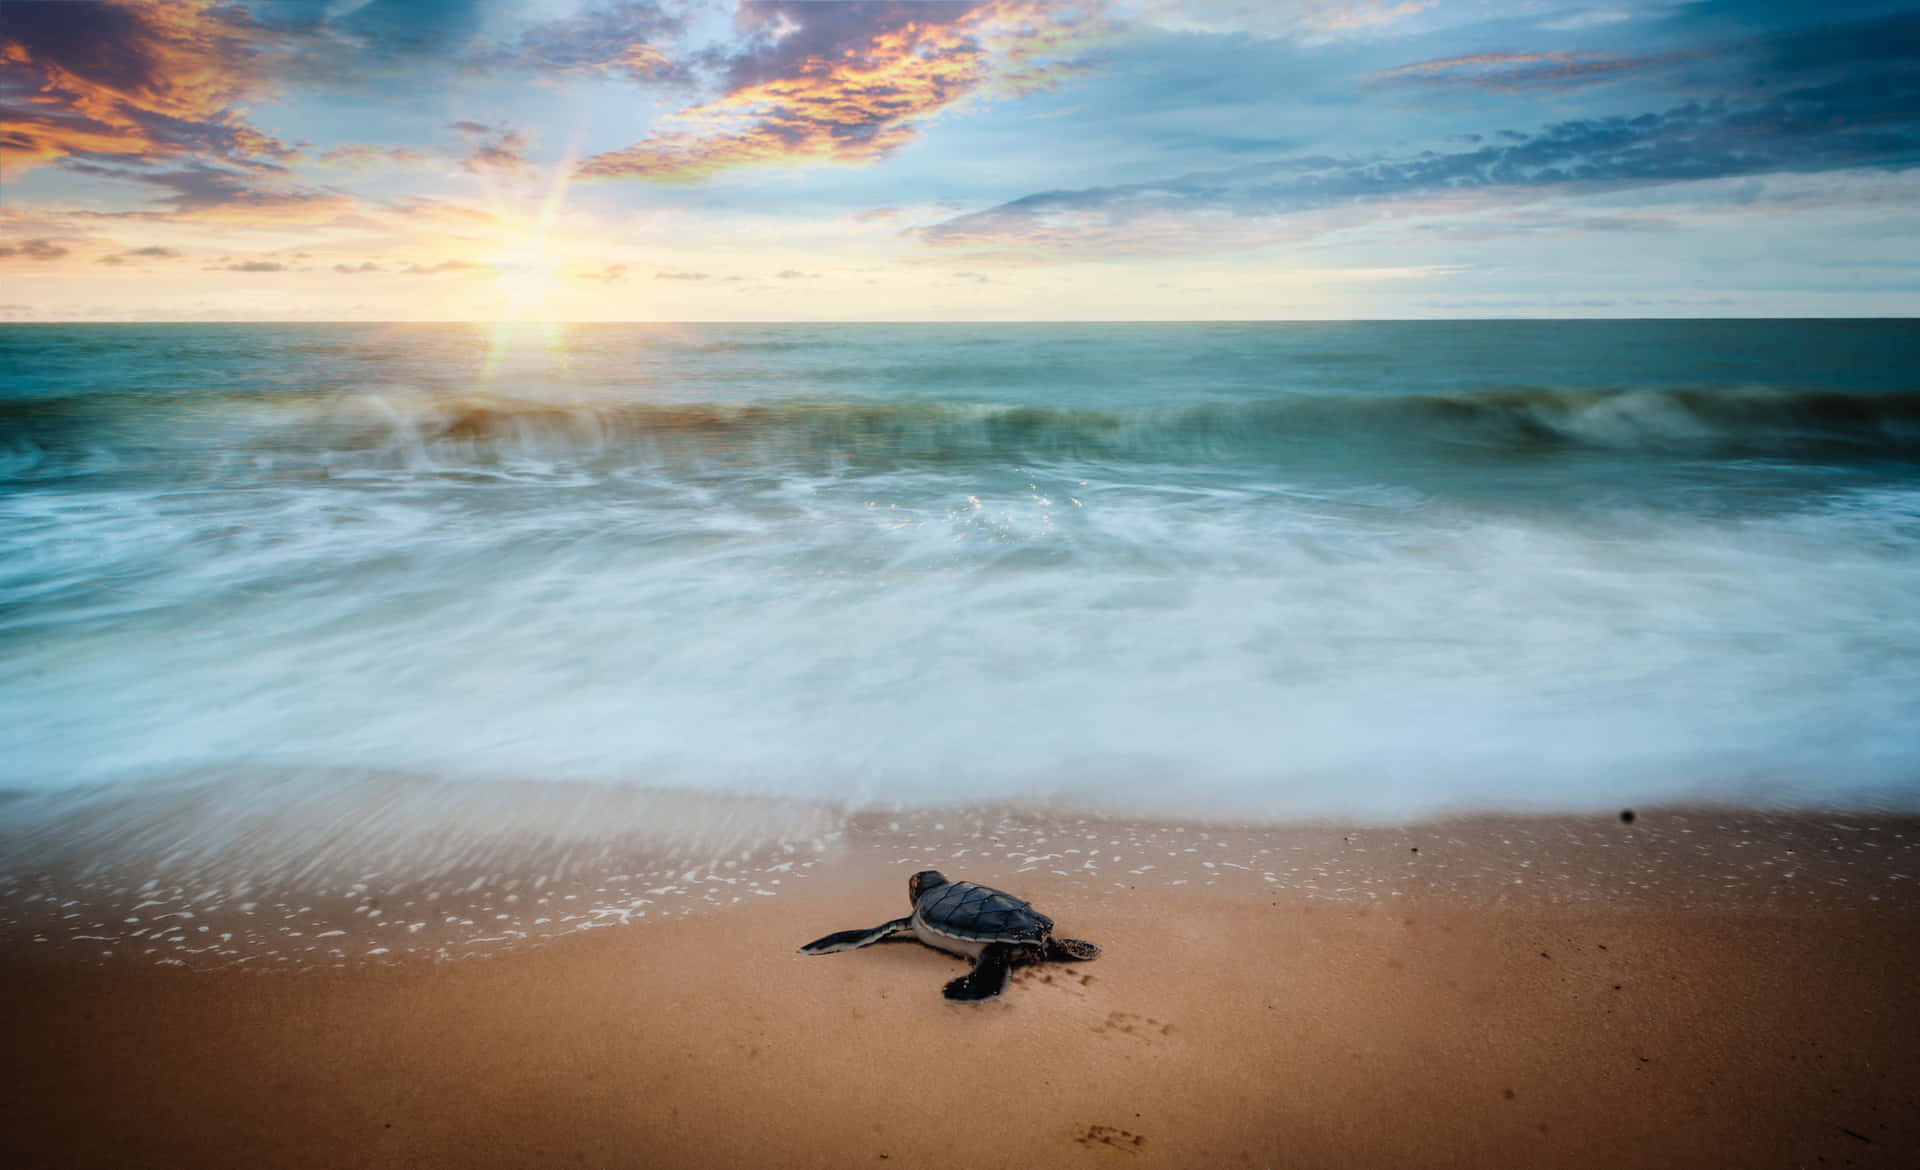 A Baby Sea Turtle Is Walking On The Beach At Sunset